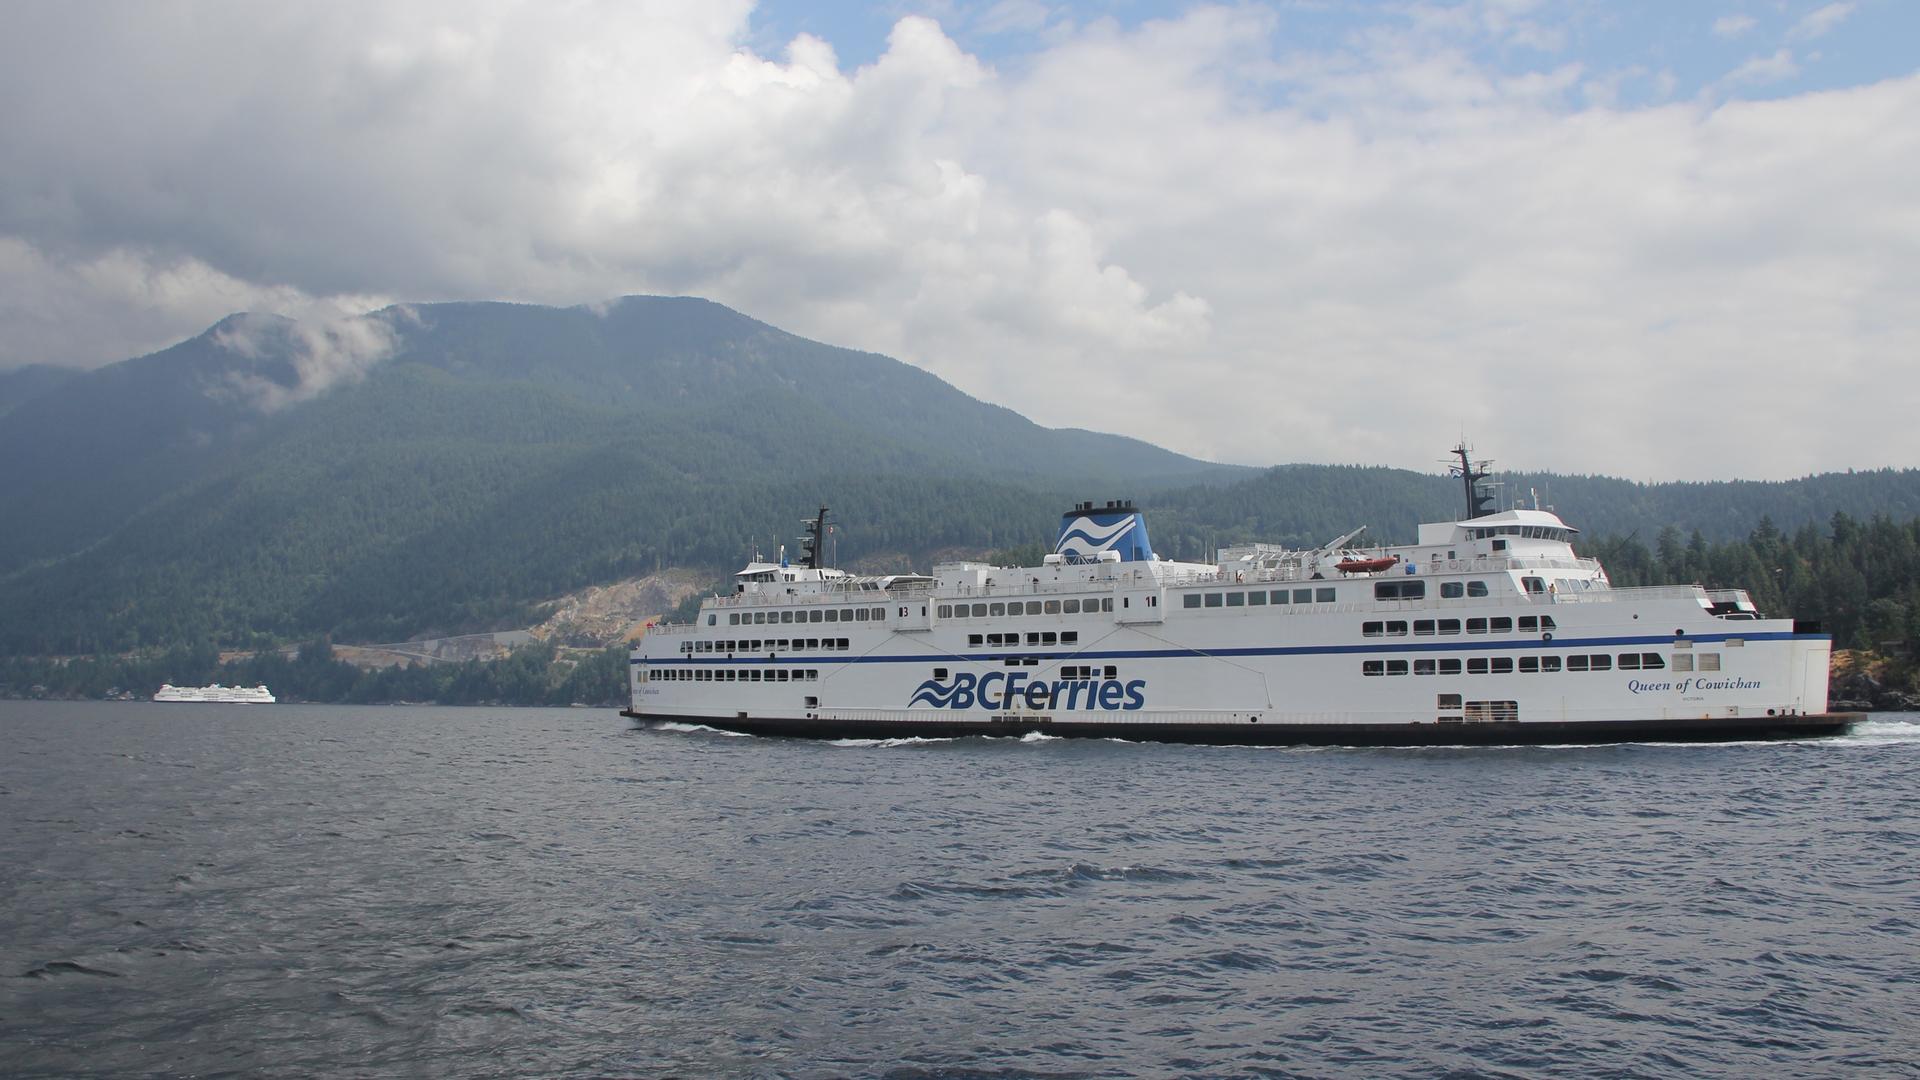 A ferry moves through British Colombia waters.